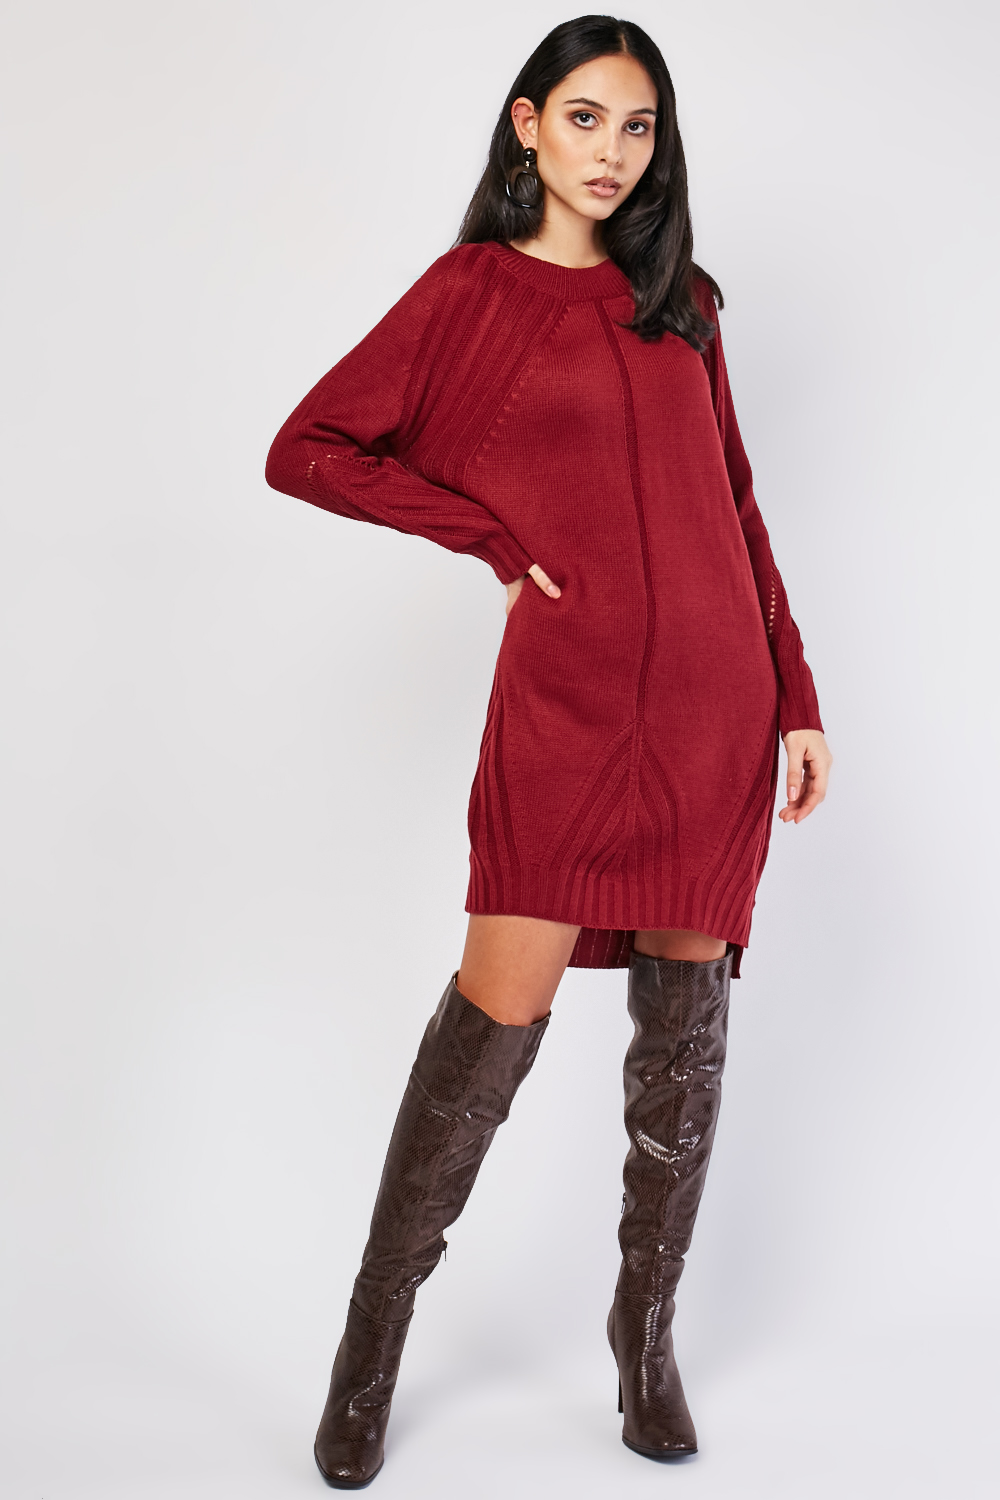 red knitted jumper dress